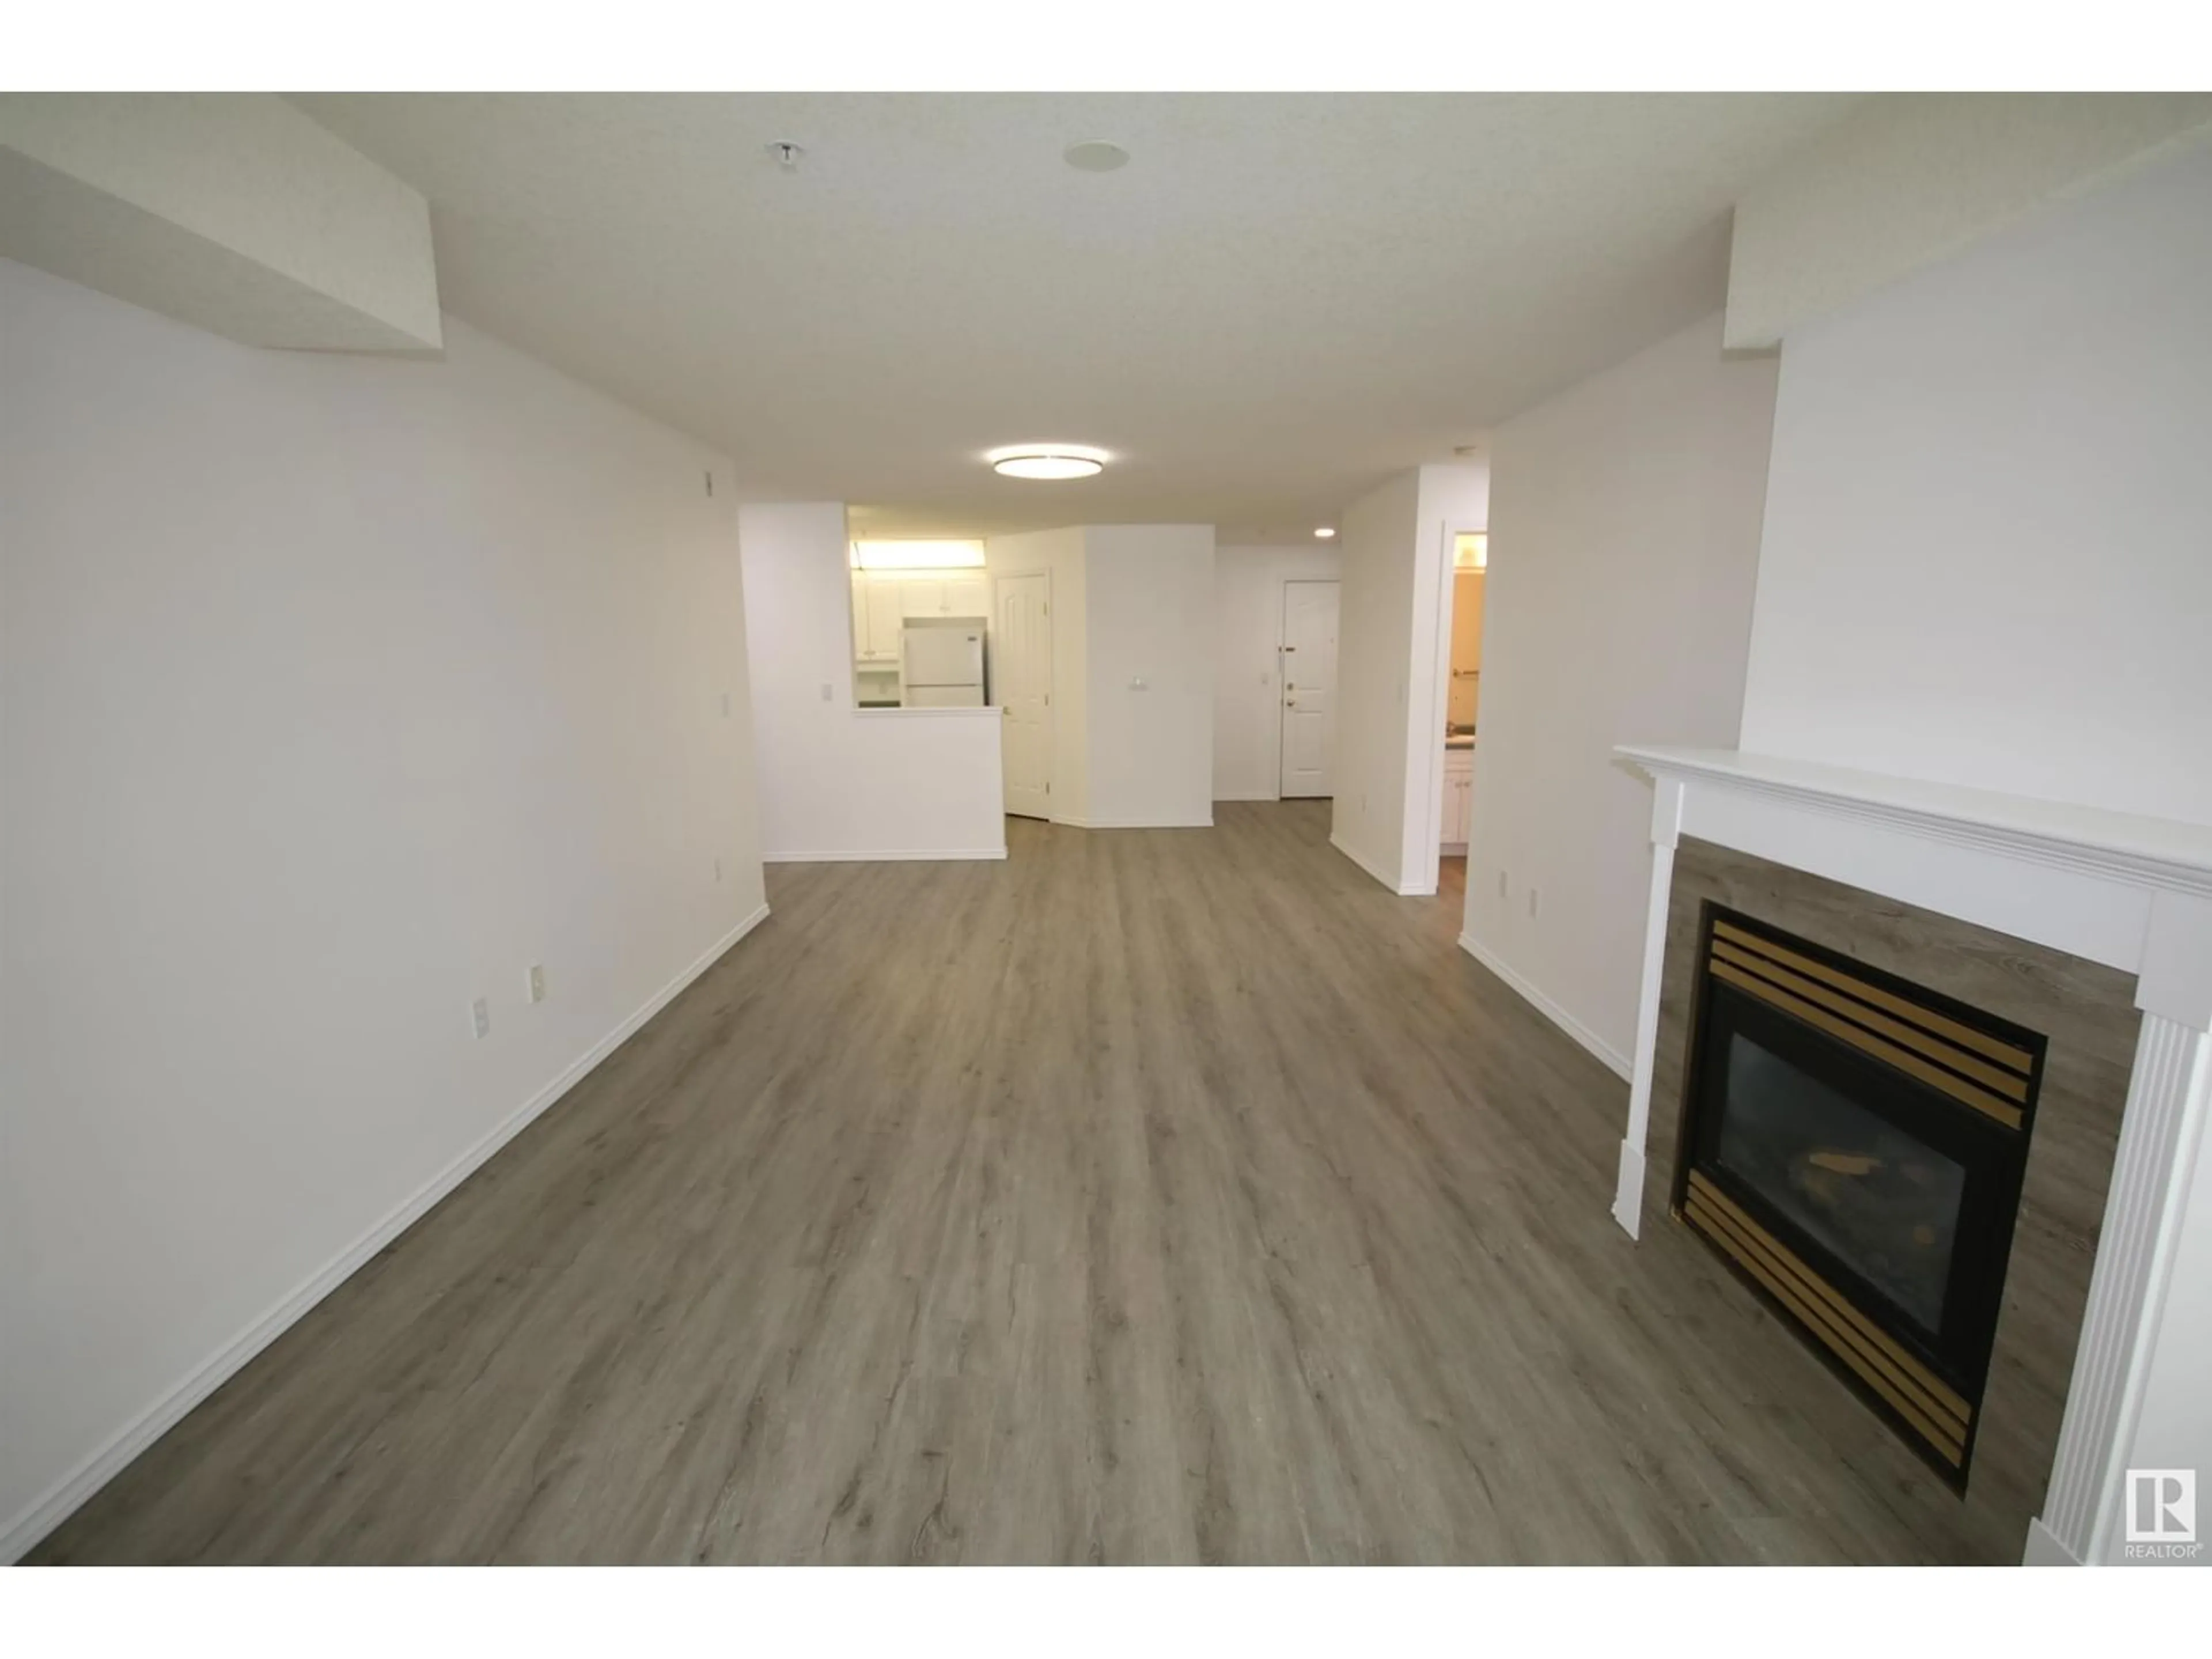 A pic of a room for #327 6703 172 ST NW, Edmonton Alberta T5T6H9